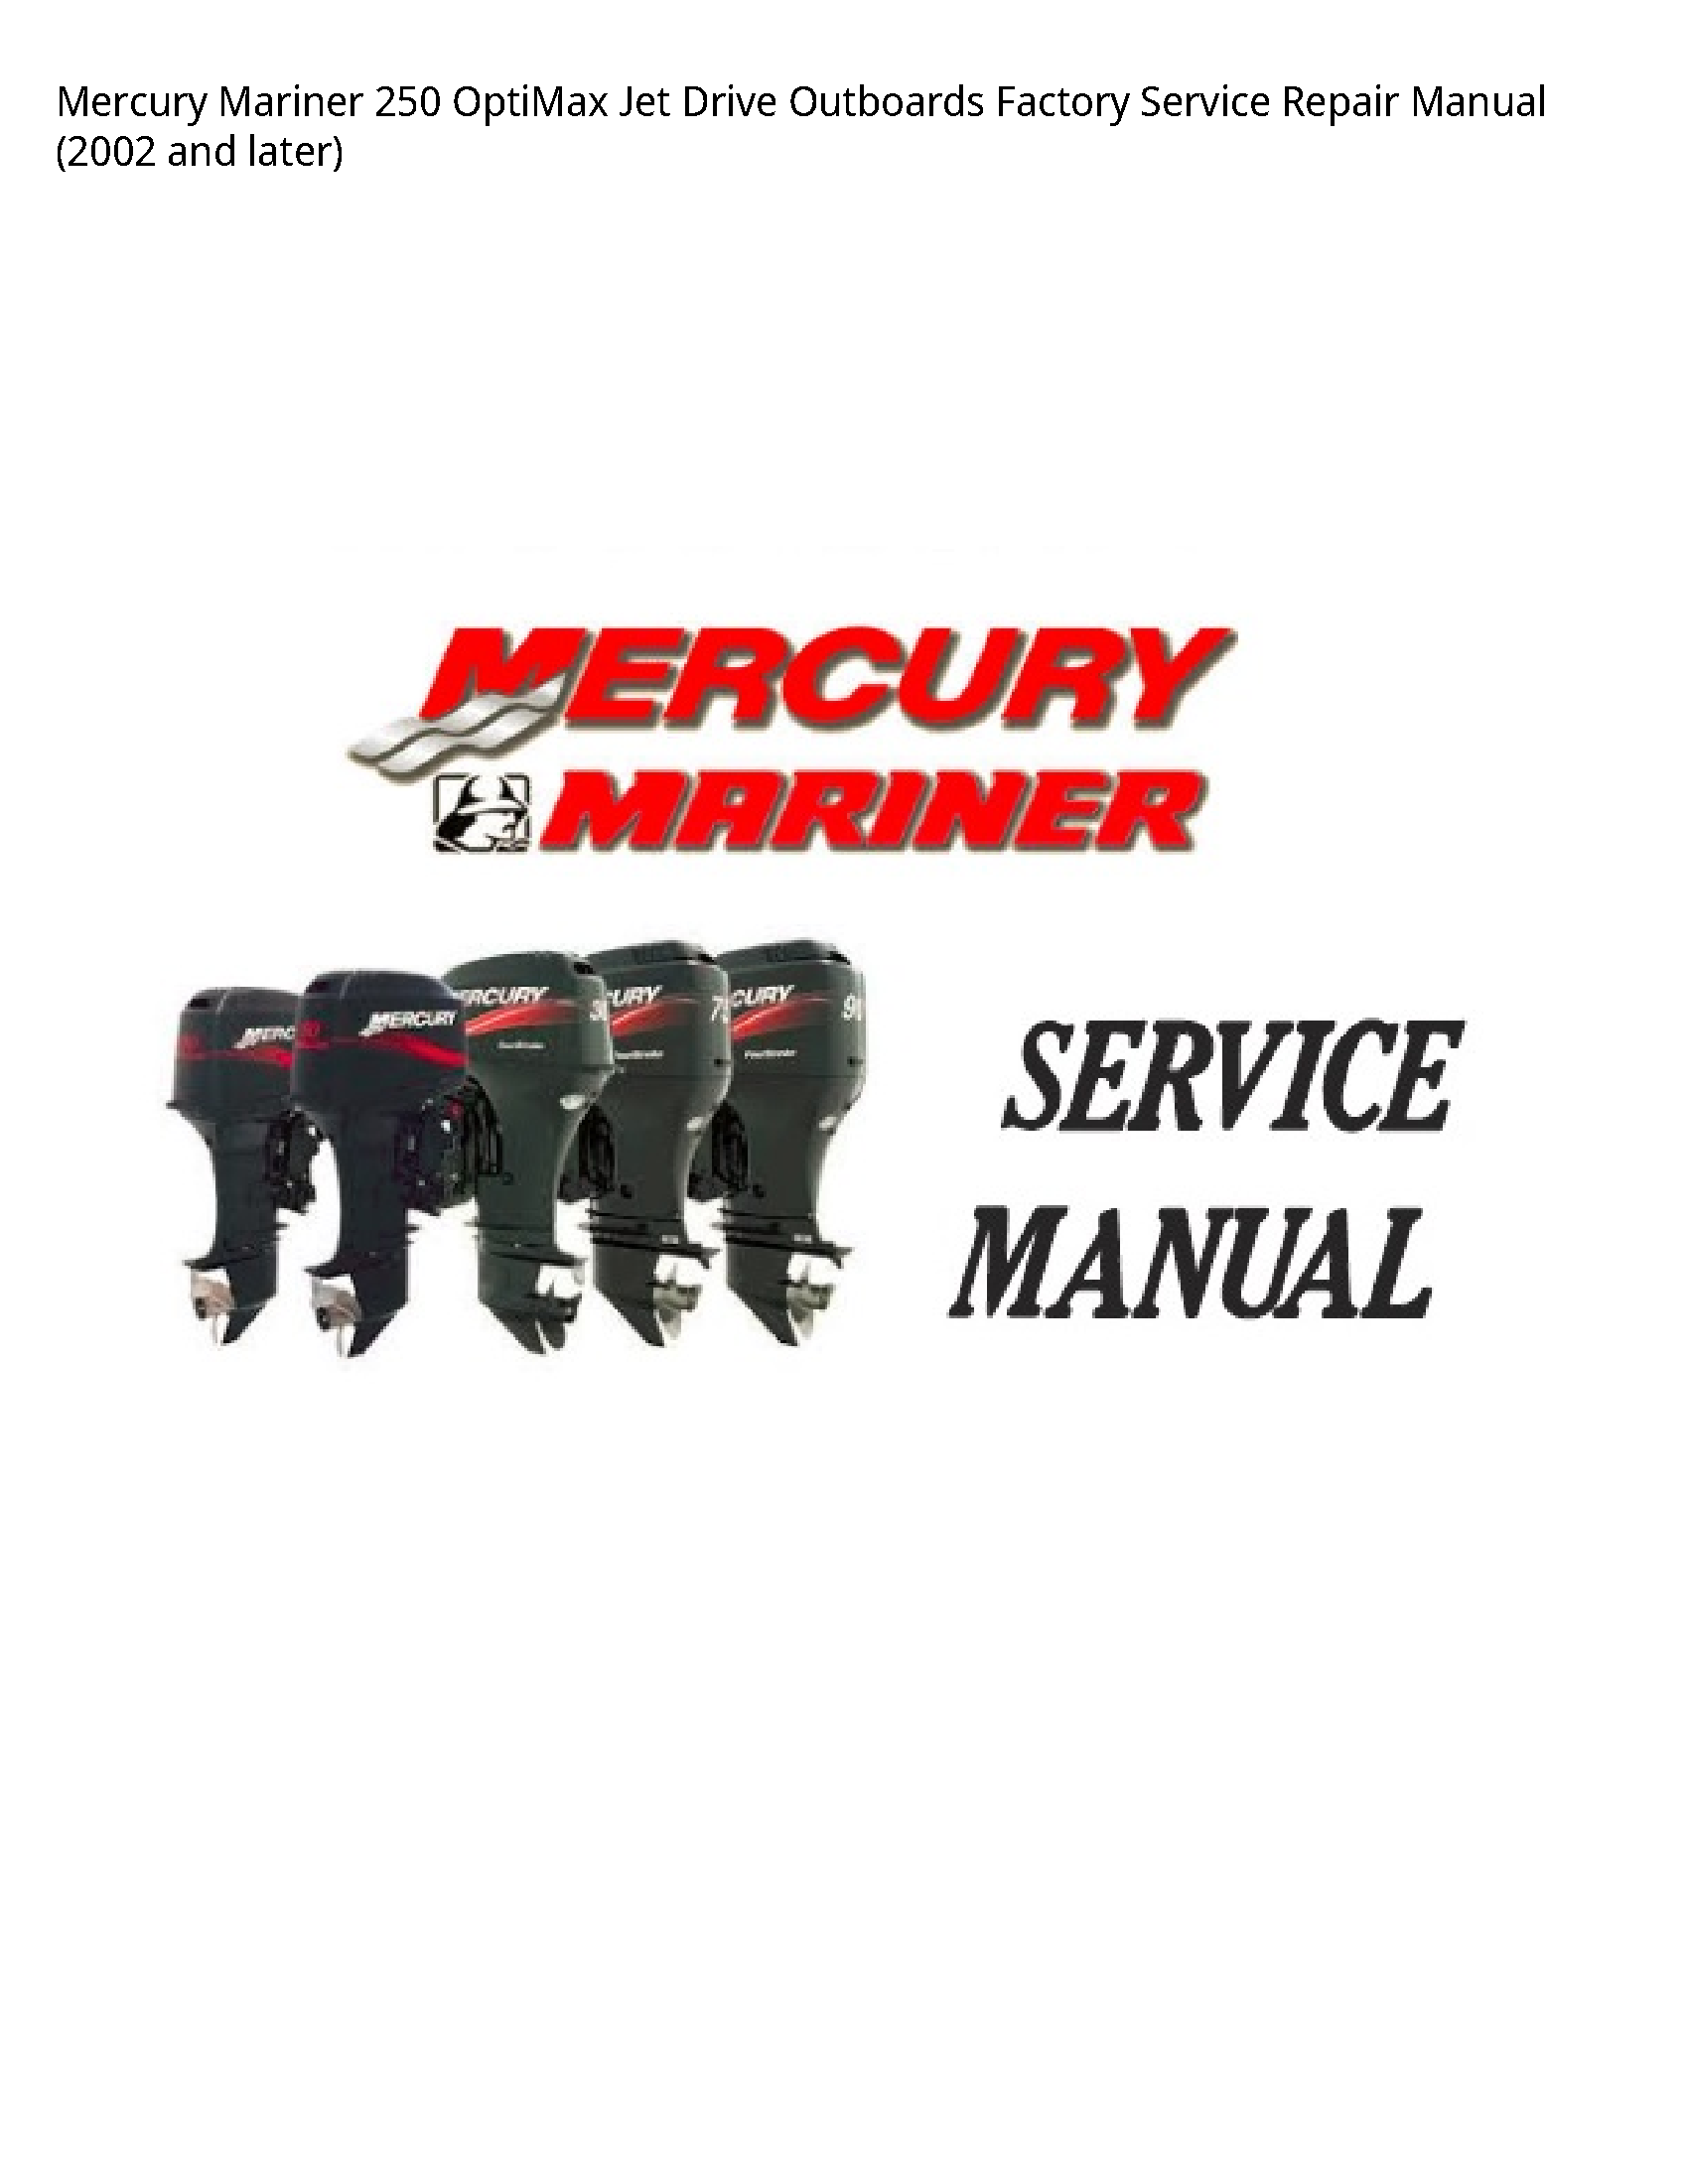 Mercury Mariner 250 OptiMax Jet Drive Outboards Factory manual